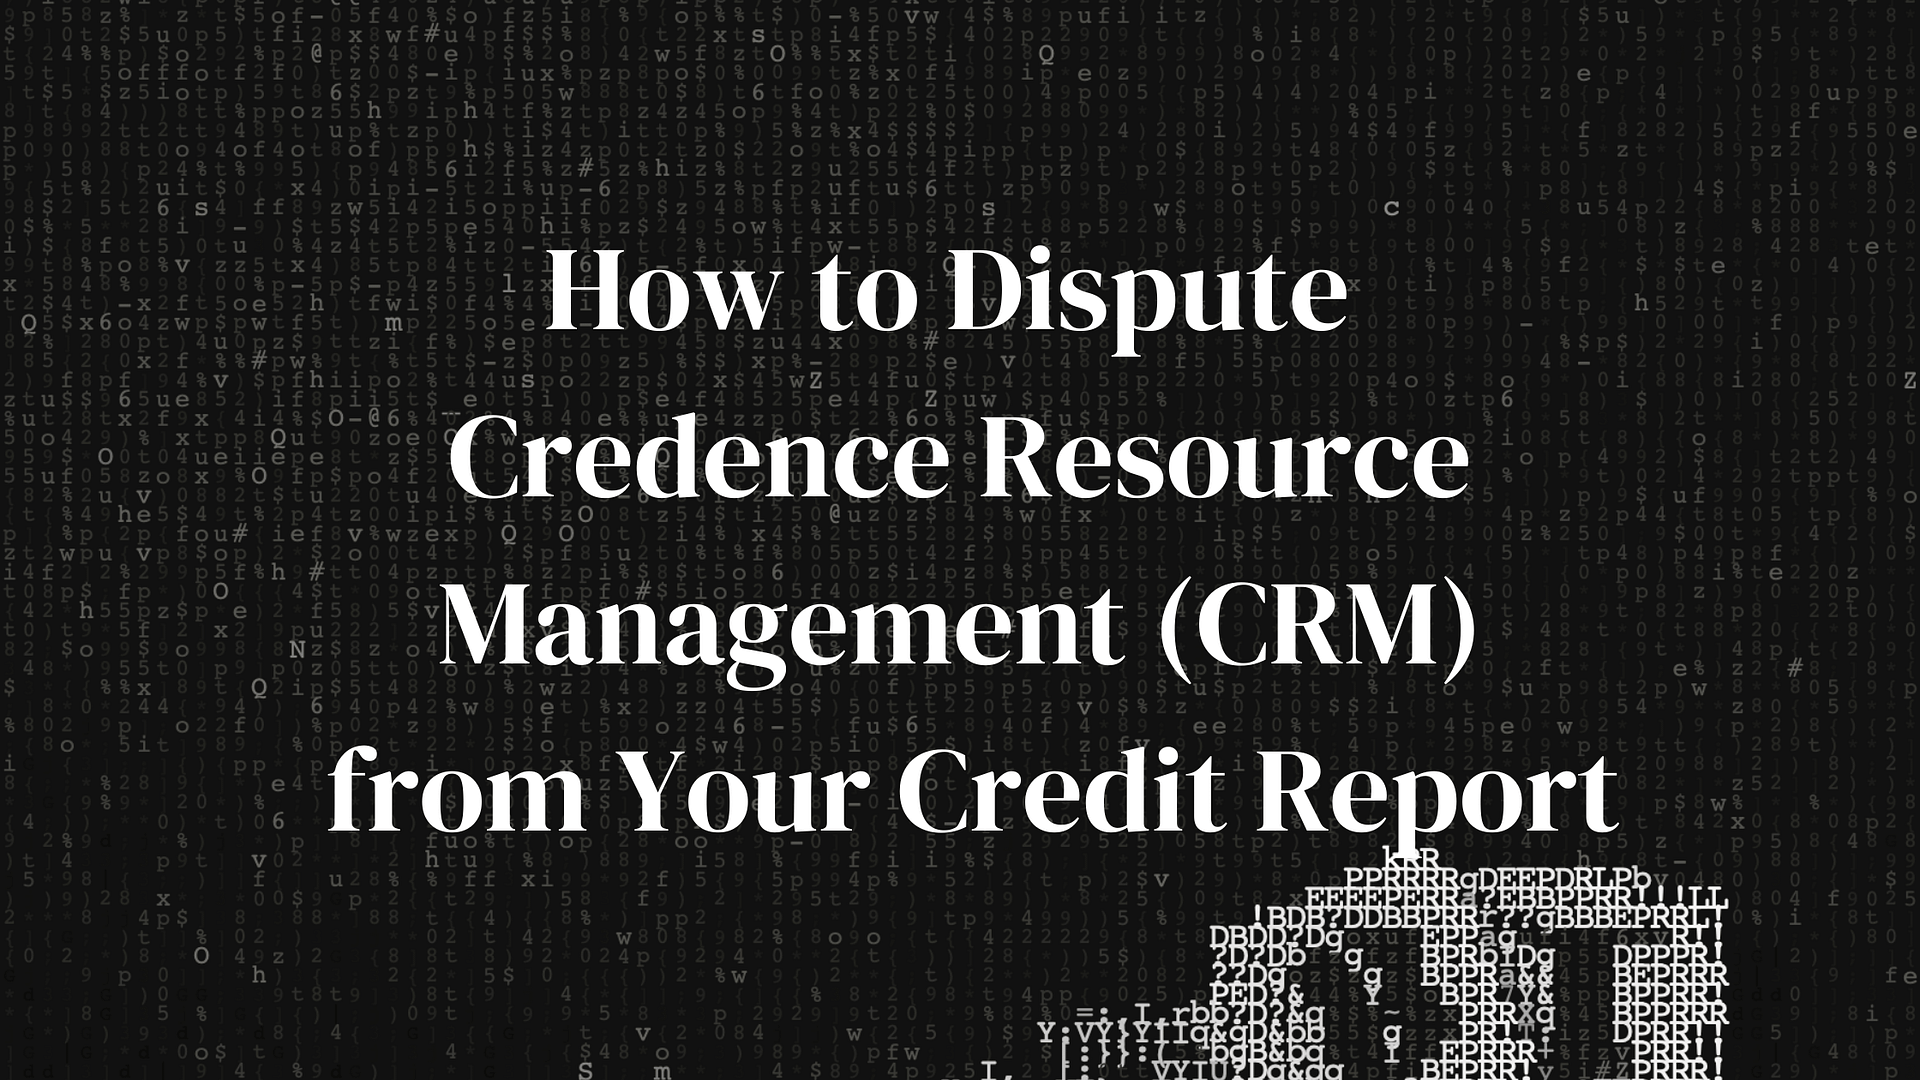 How to Dispute Credence Resource Management CRM from Your Credit Report